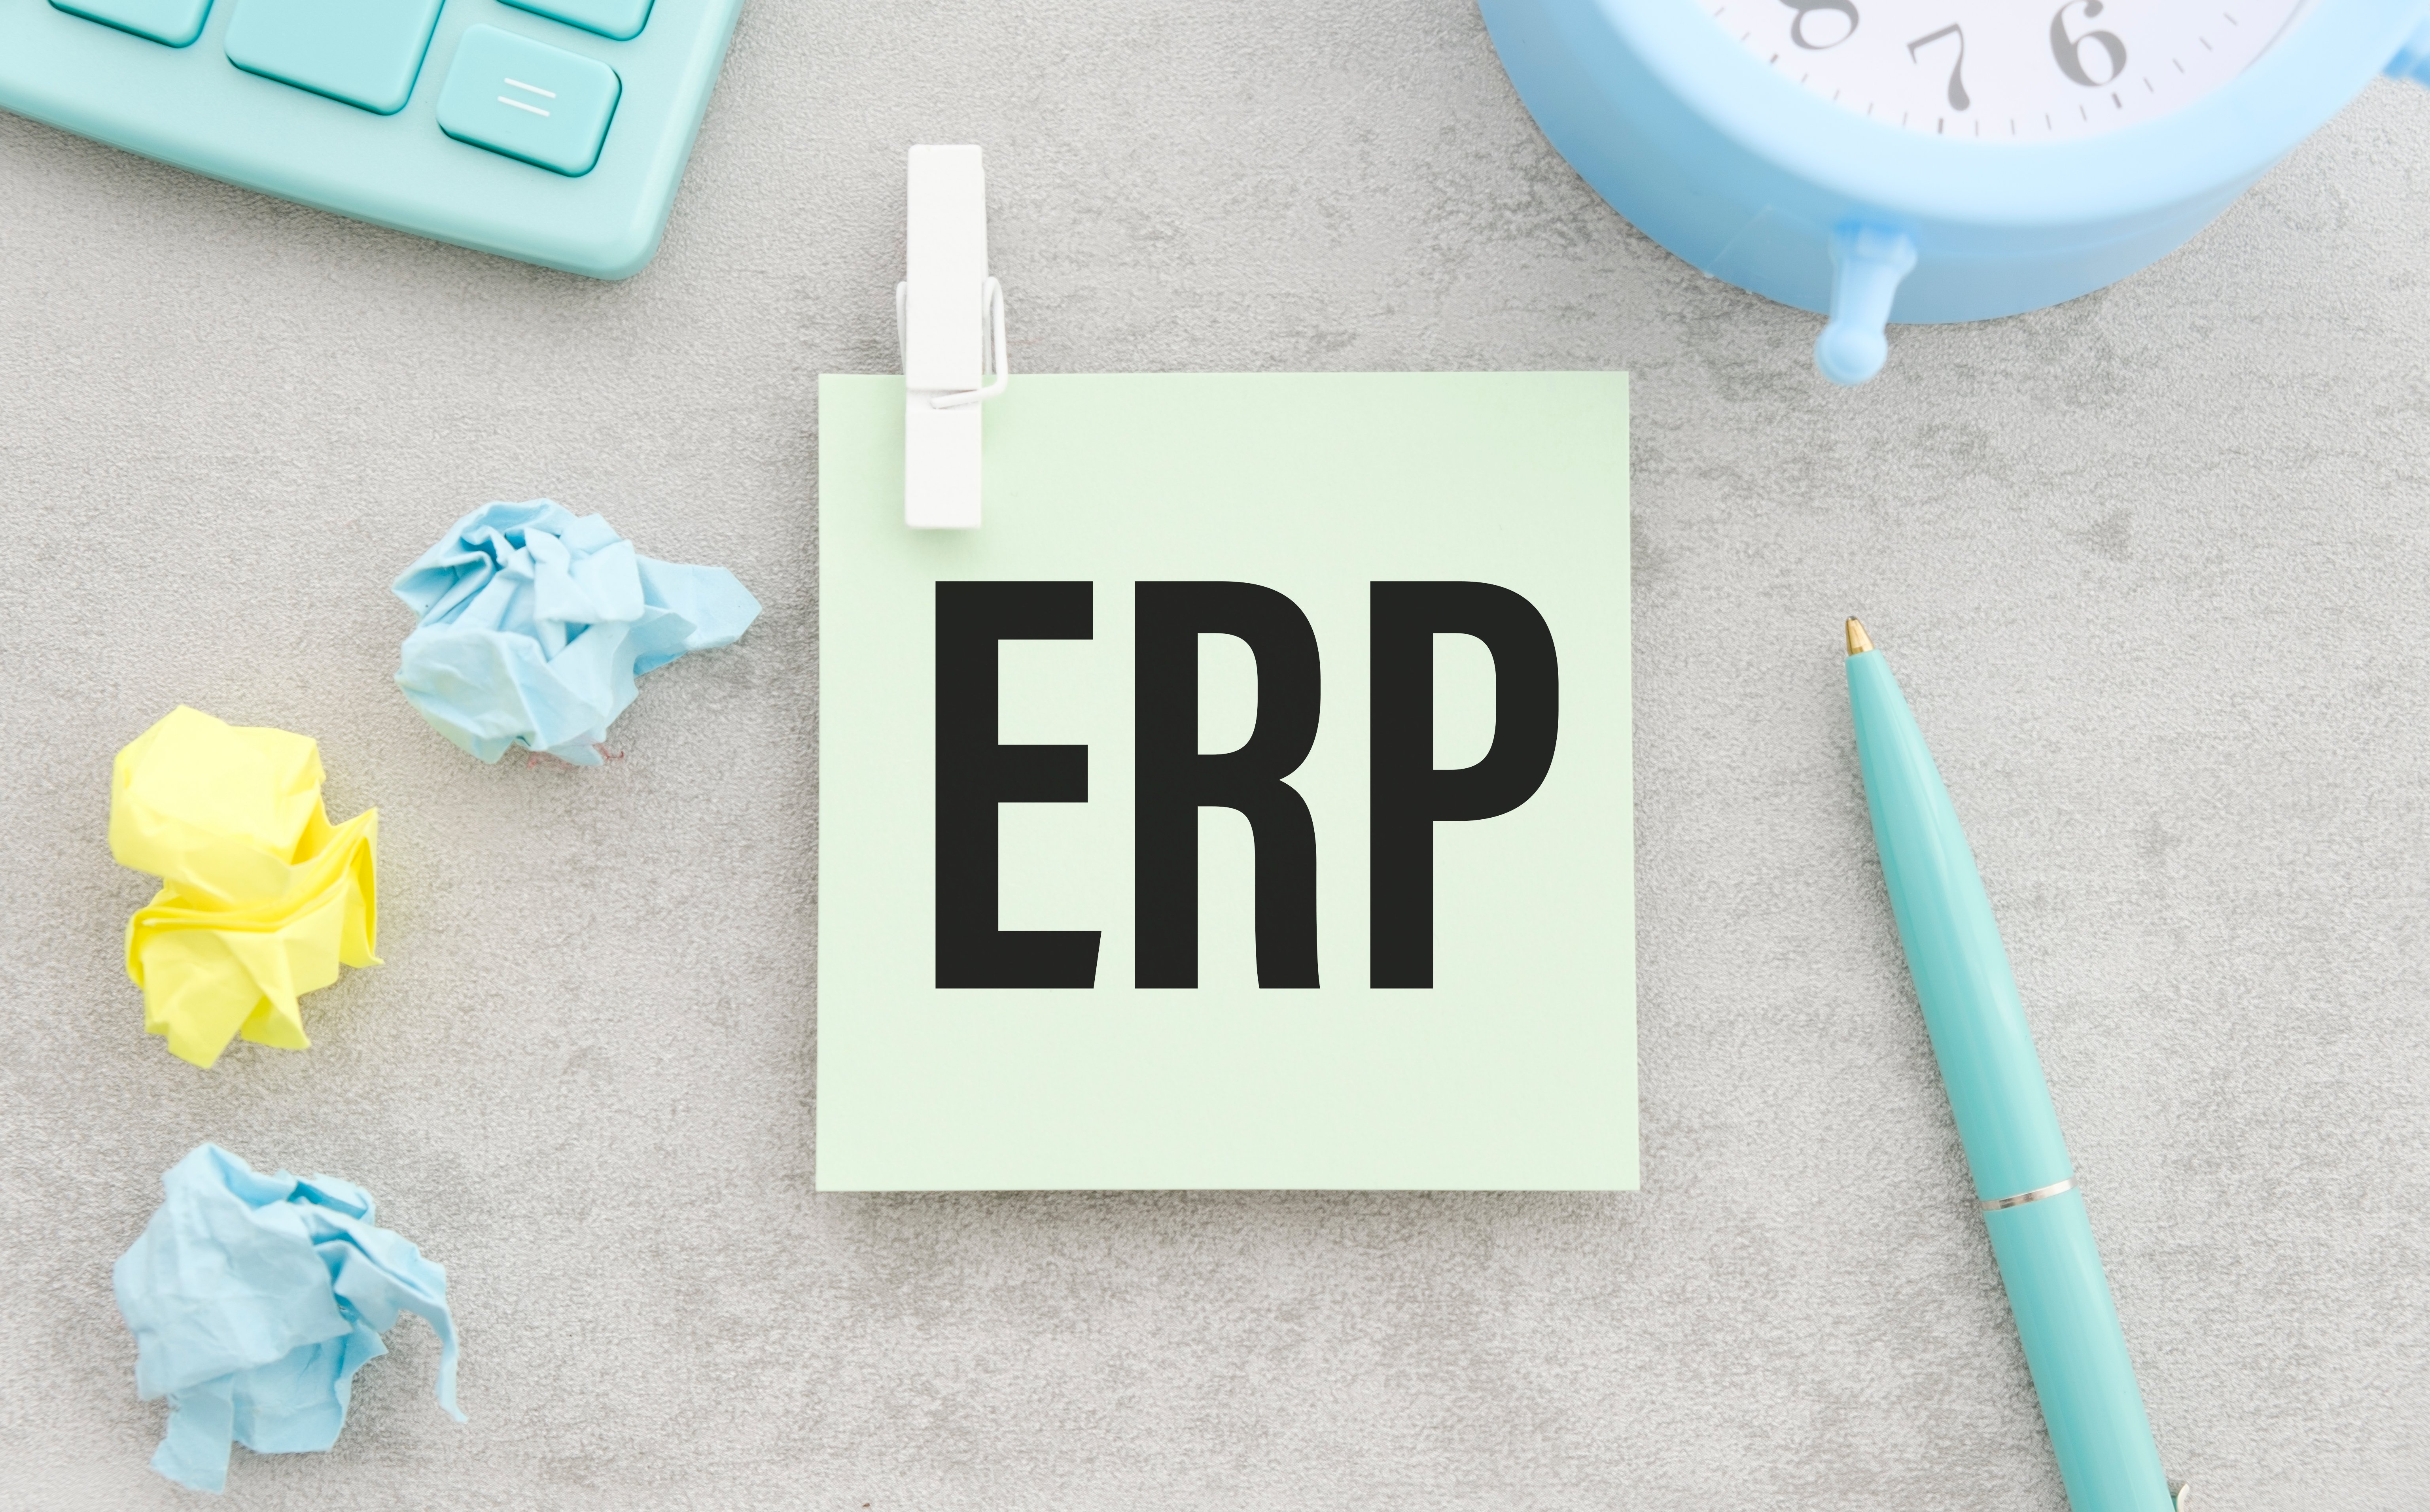 there-is-pen-between-the-blue-sticky-note-with-the-text-erp-and-the-blue-chart-business-concept-view-from-above